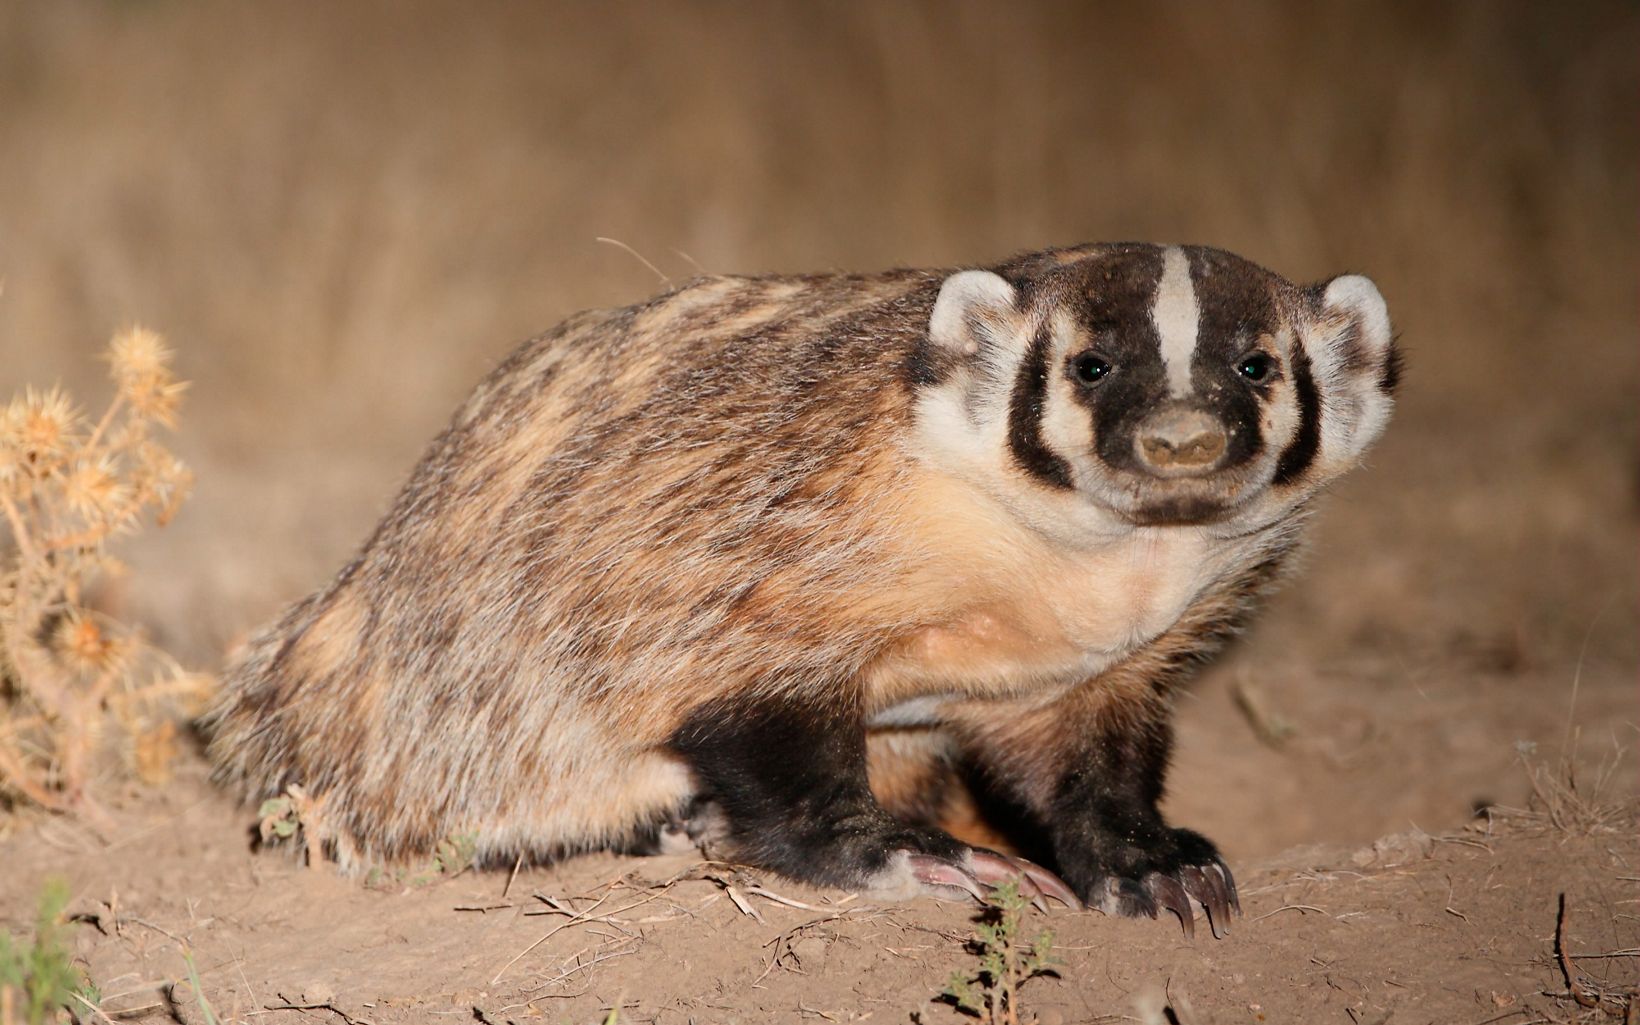 Medium sized mammal with black and white stripes on face.